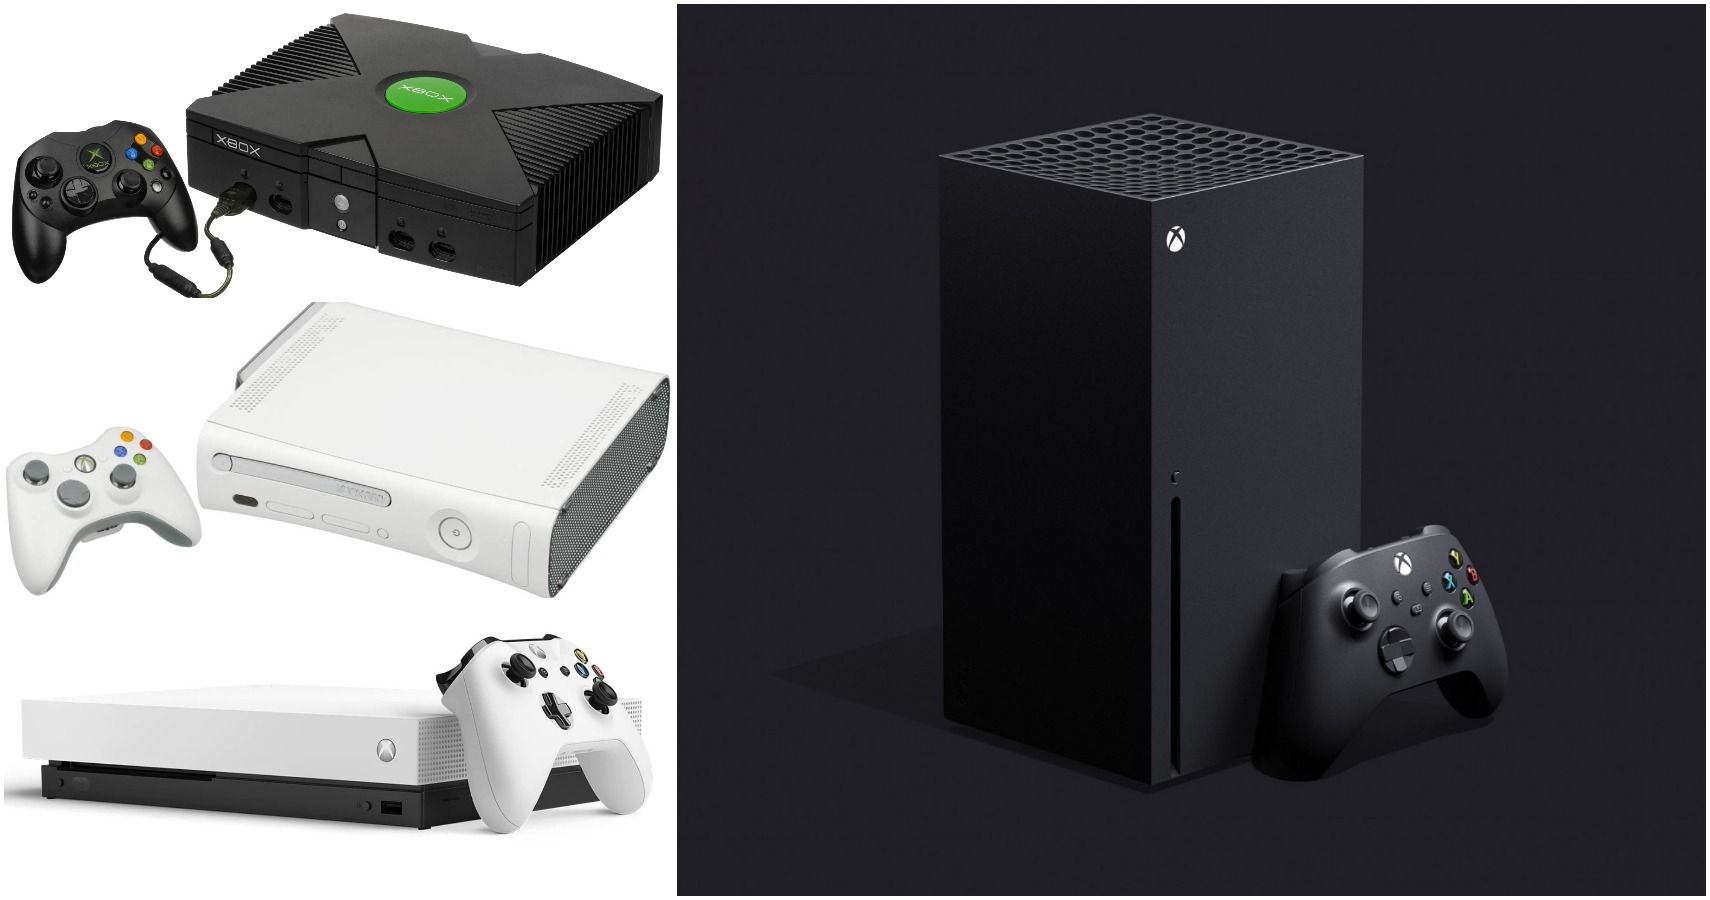 How Big The Xbox Series X Is, Compared To Previous Models